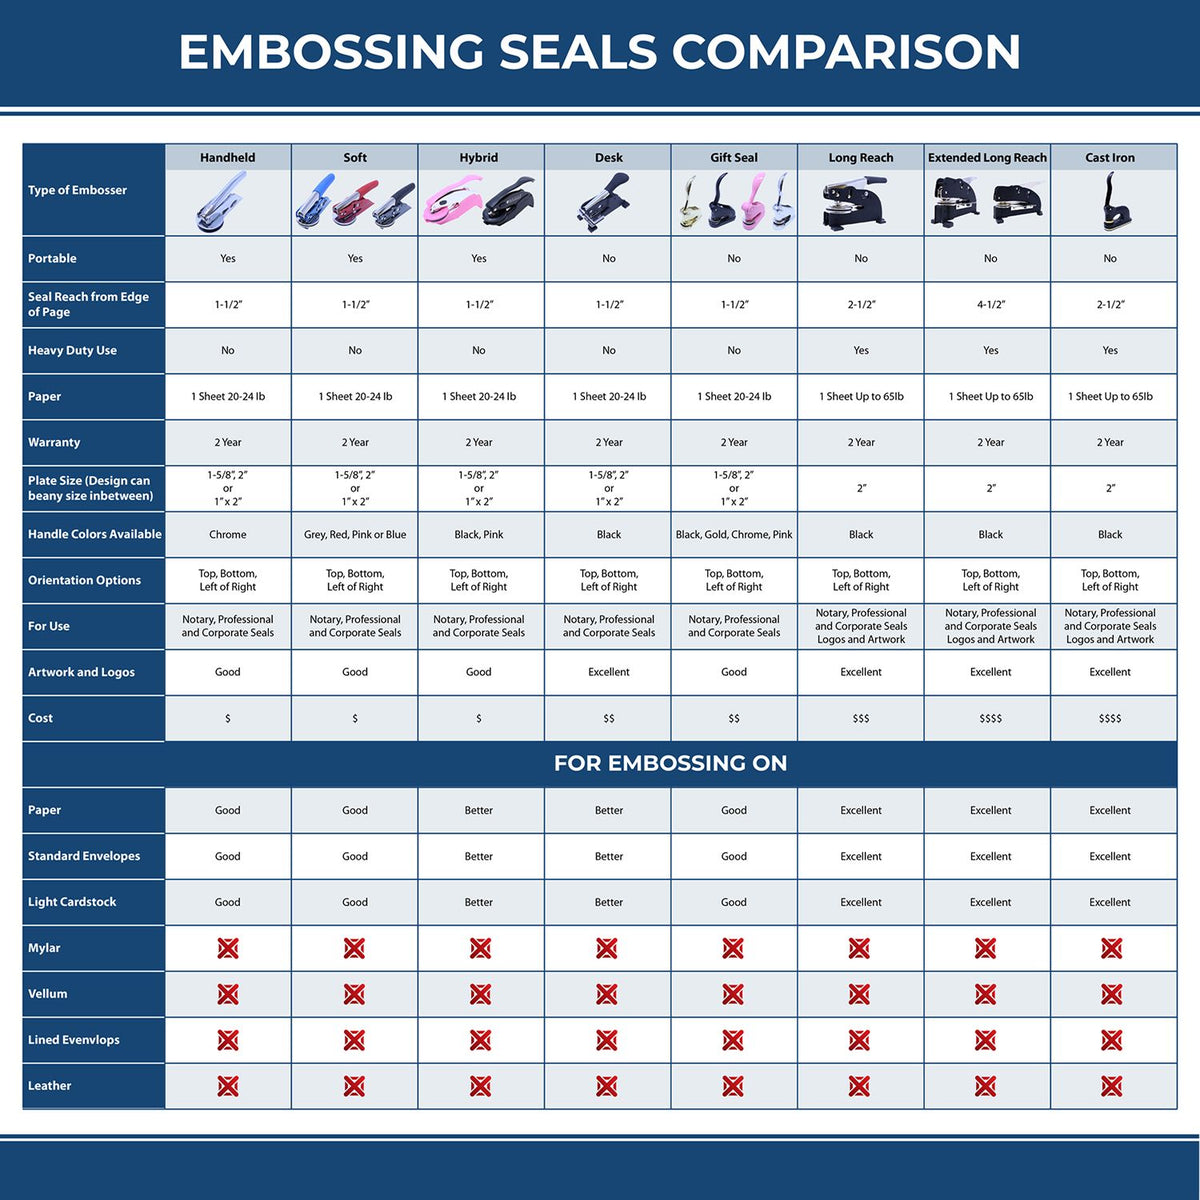 A comparison chart for the different types of mount models available for the District of Columbia Long Reach Architectural Embossing Seal.